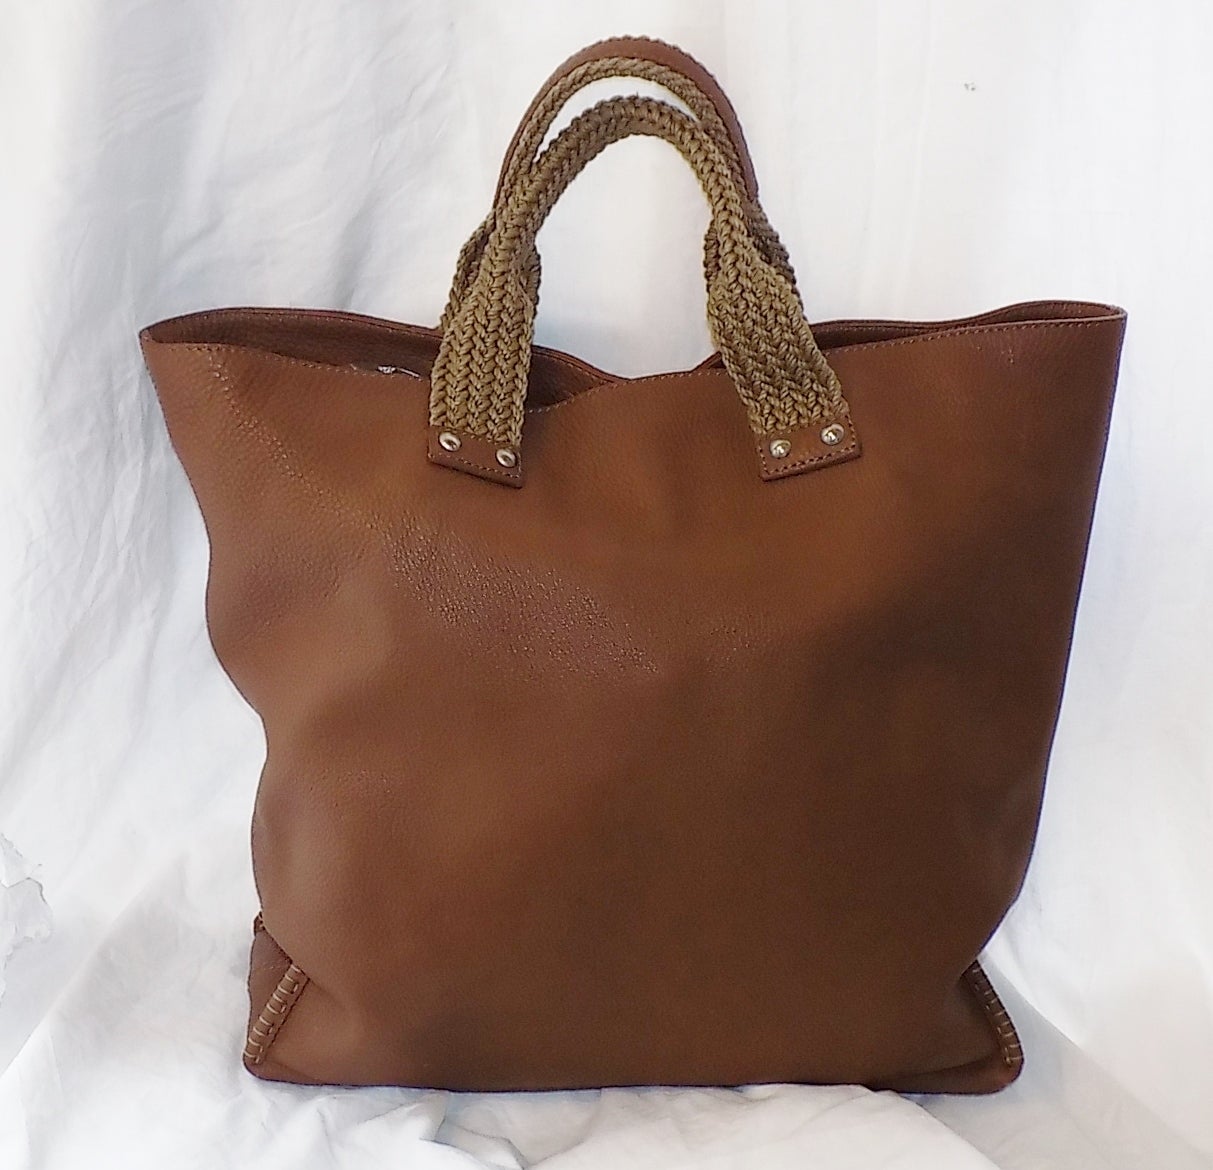 Perfect large tote from Fendi!  Pebbled leather. Fendi insignia on one side of the bag.   Woven handles reinforced with leather.  Fabulous design.  Hand stitched and reinforced edges of the bag. protective bottom feed  with Fendi logo. . Linen